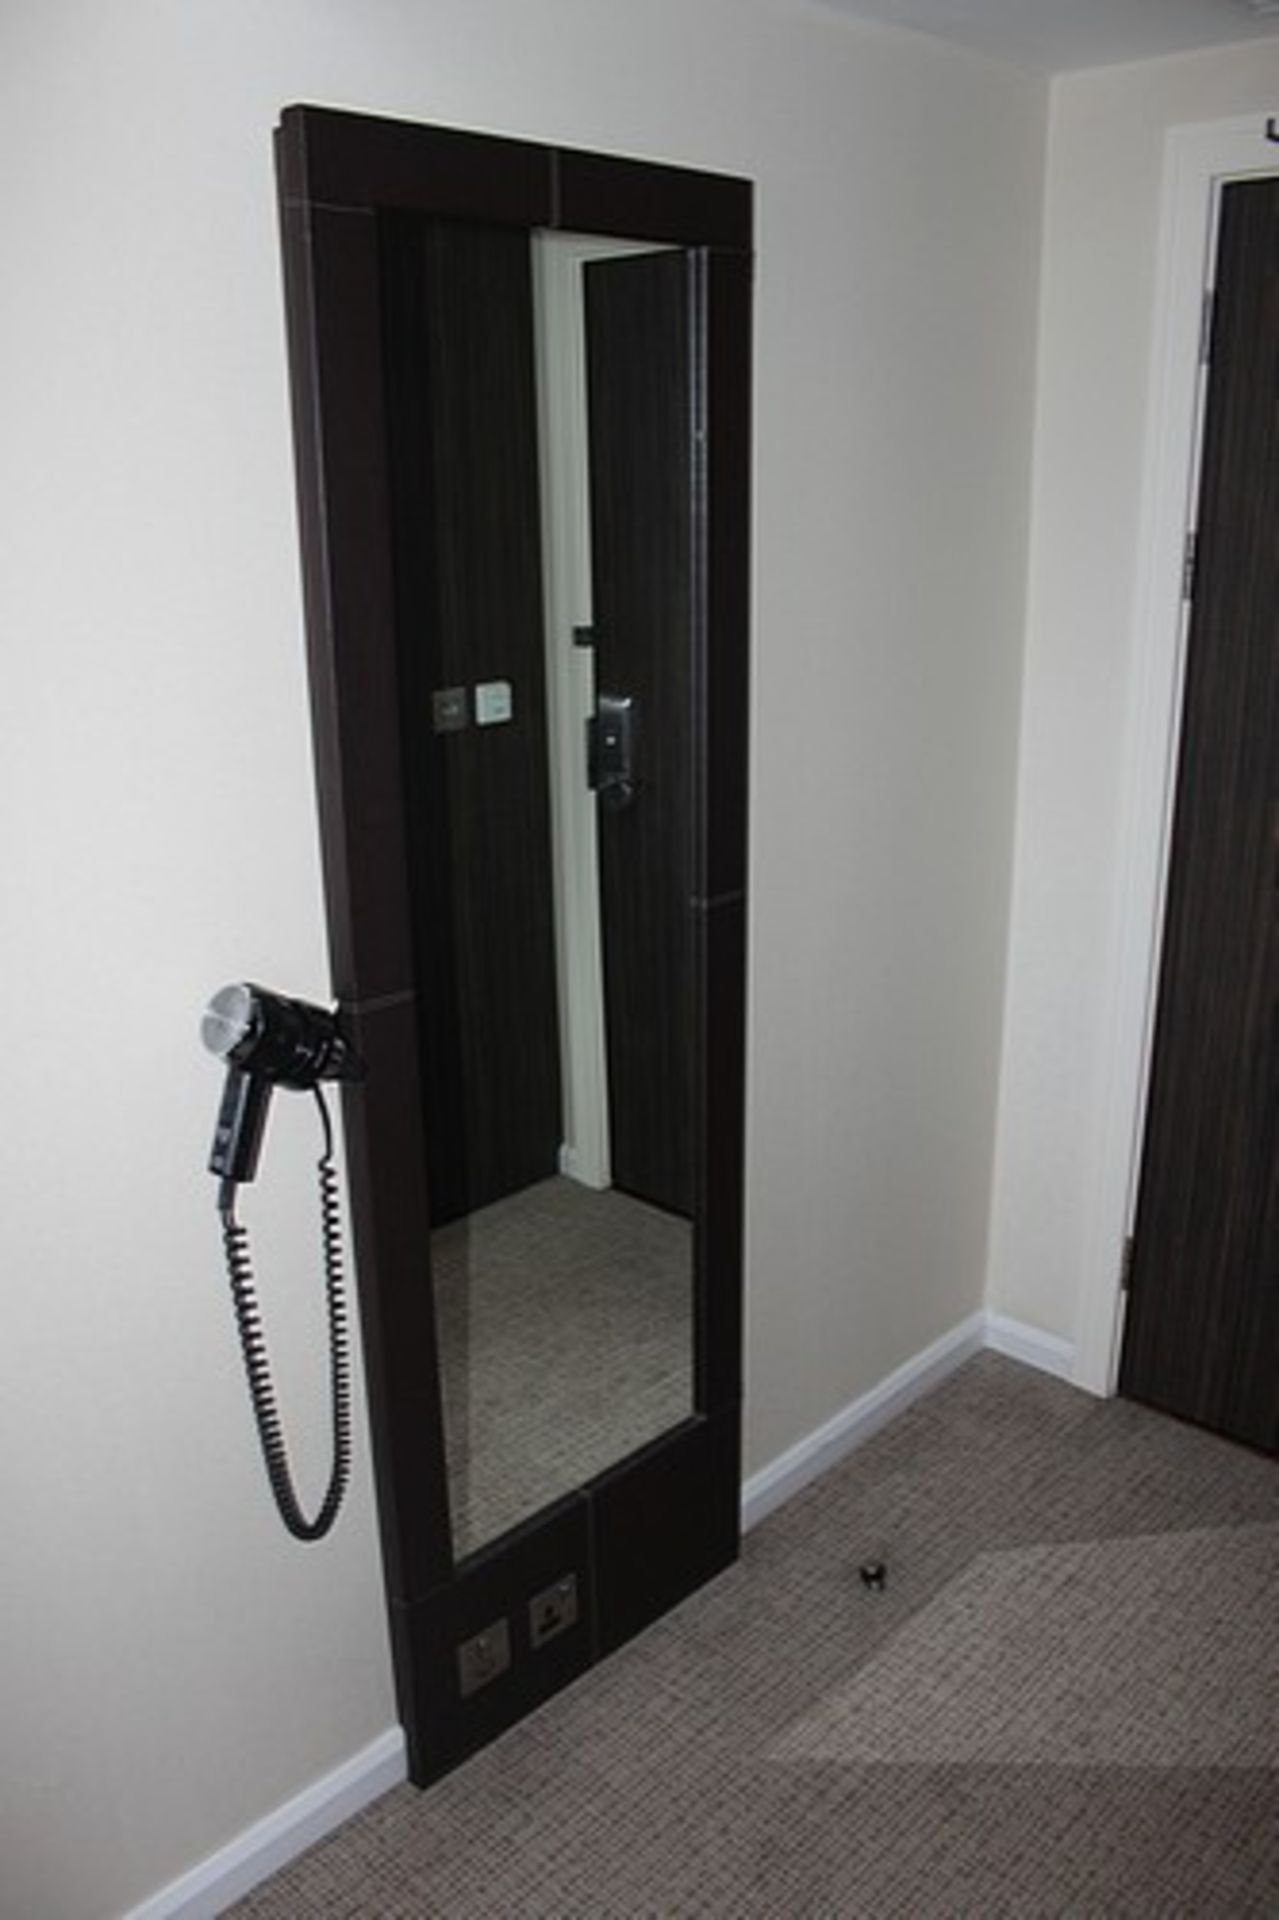 Curtis Contract Furniture Full Length Dress Mirror Brown 534 (w) x 50 (d) x 2150mm (h) (Exec) - Image 3 of 3